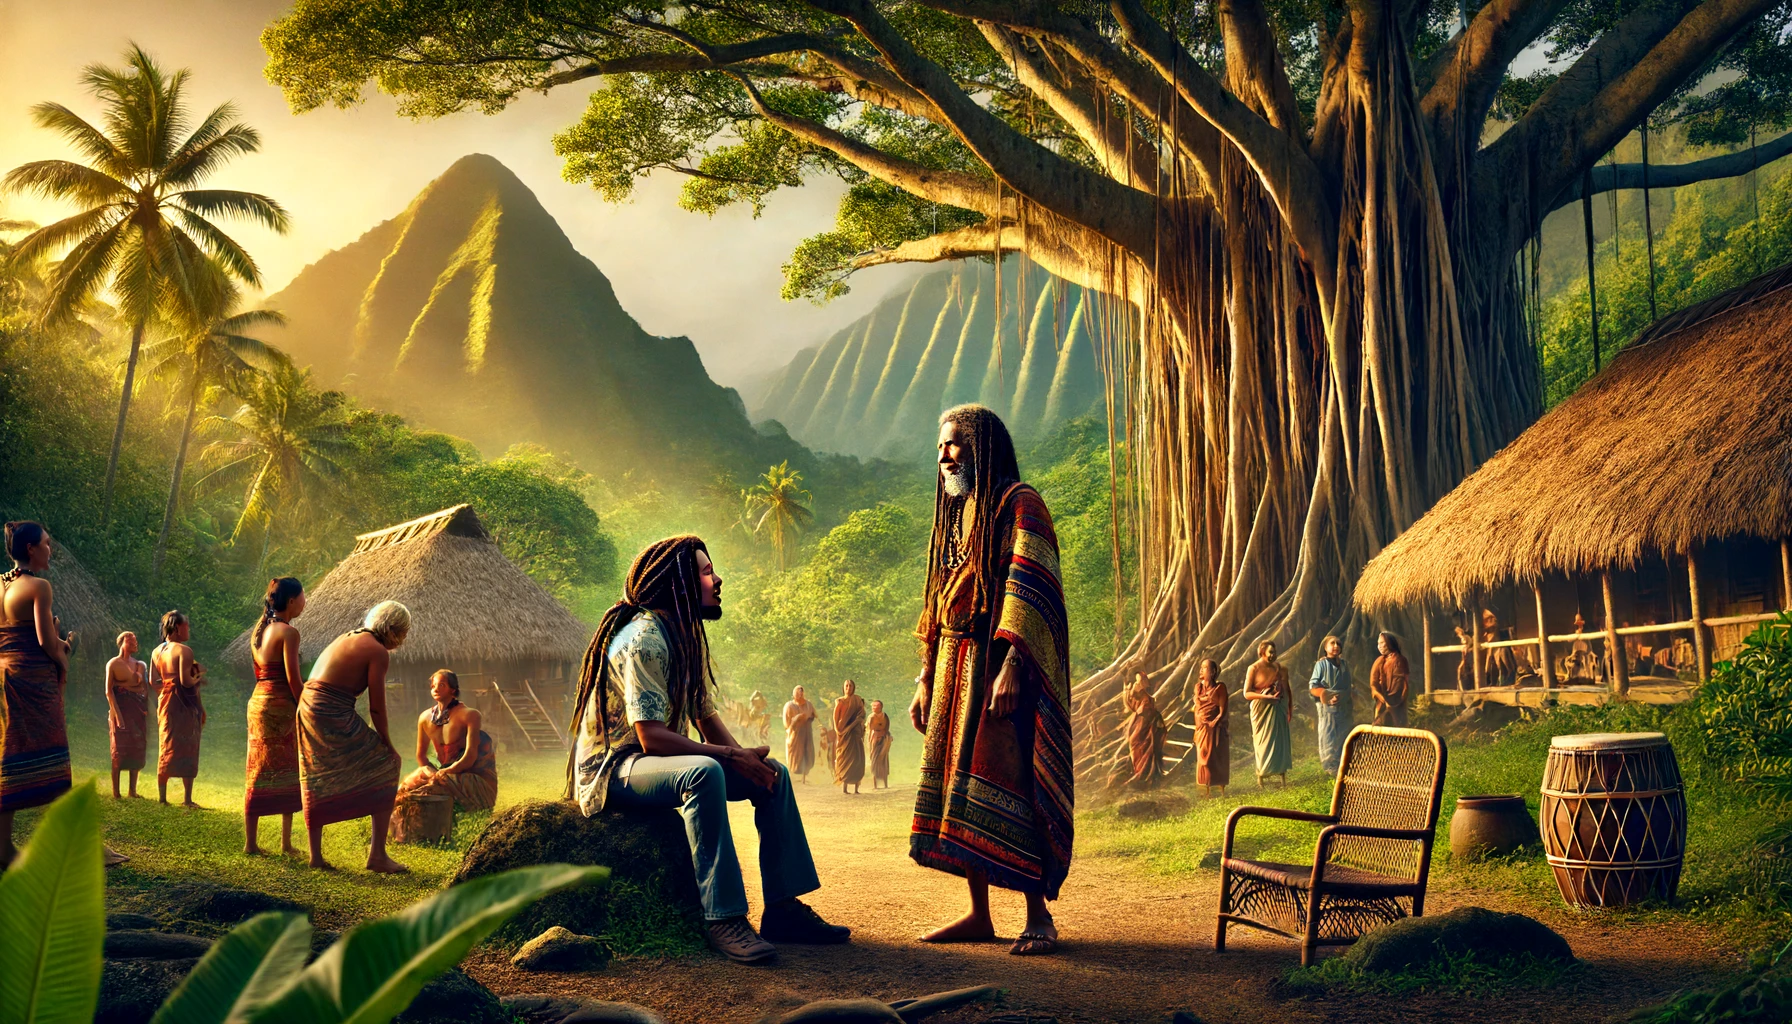 A fictional meeting between Bob Marley and Hale Makua inspired by the book Adventure of a Lifetime by John A Brodie